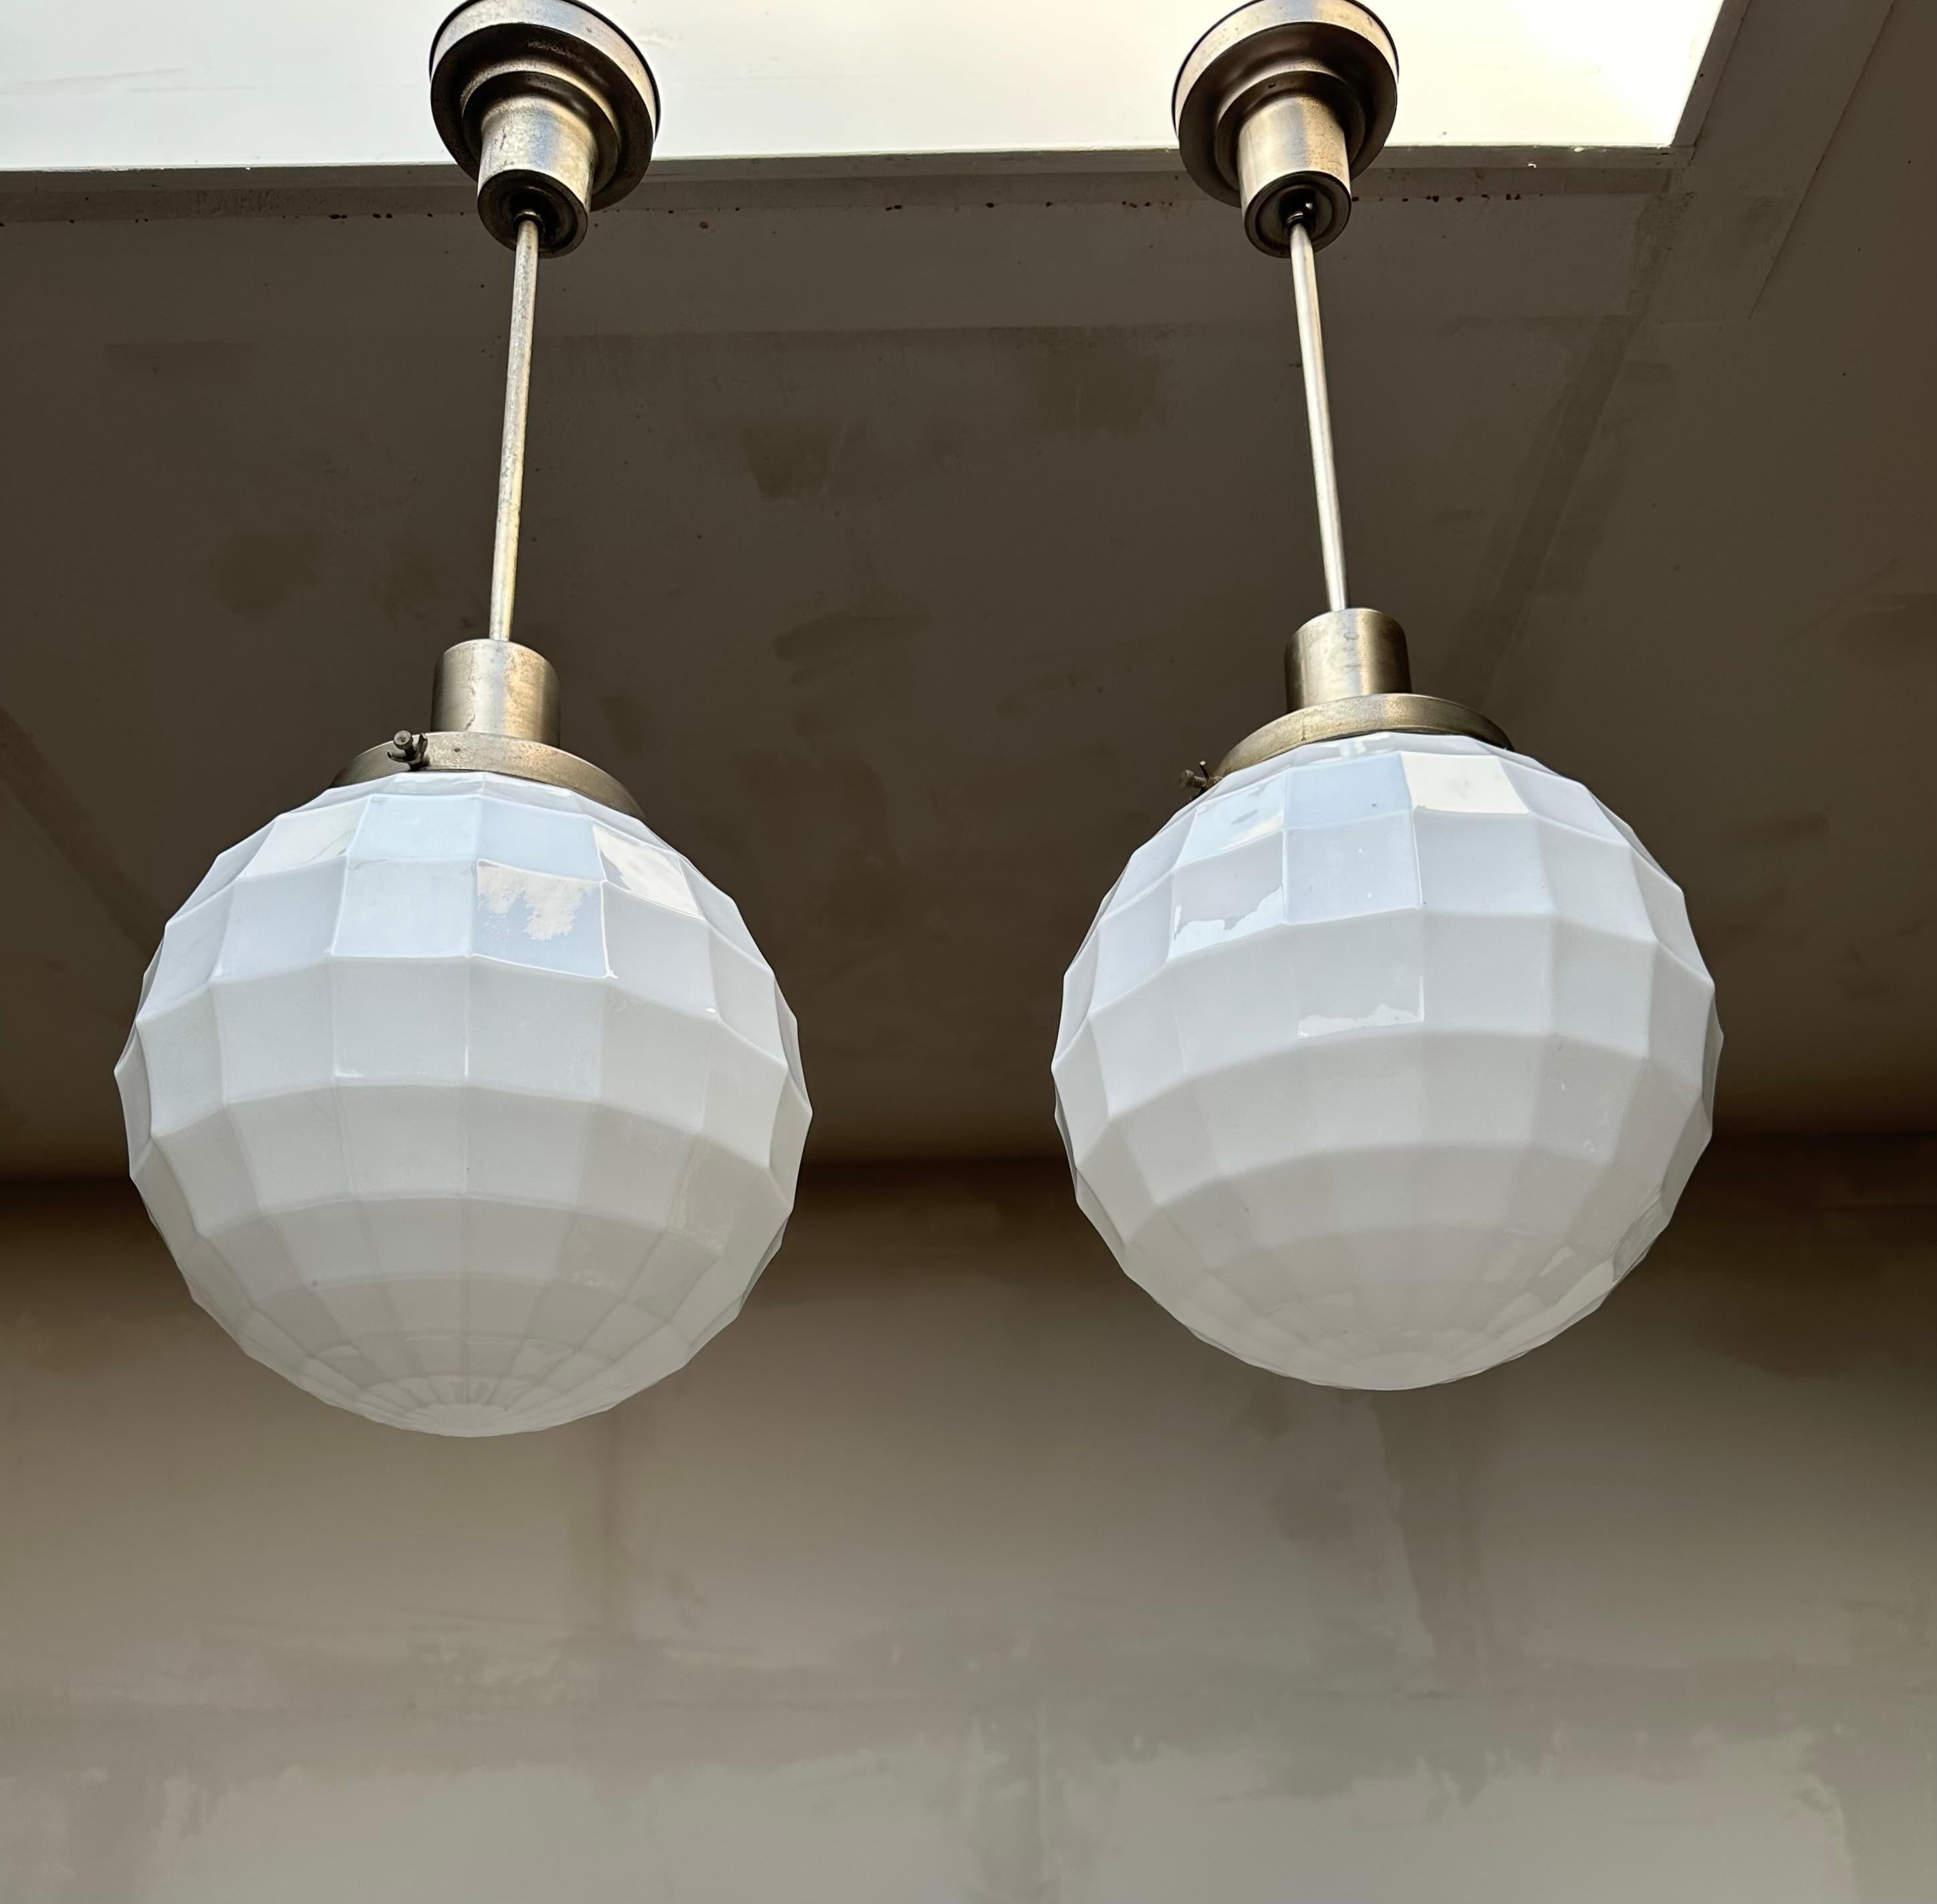 Beautiful shape and excellent condition pendants by Philips, circa 1920.

Finding one rare original light fixture is a good thing, but finding two is always that extra bit special. And when those light fixtures also come with extremely rare, opaline